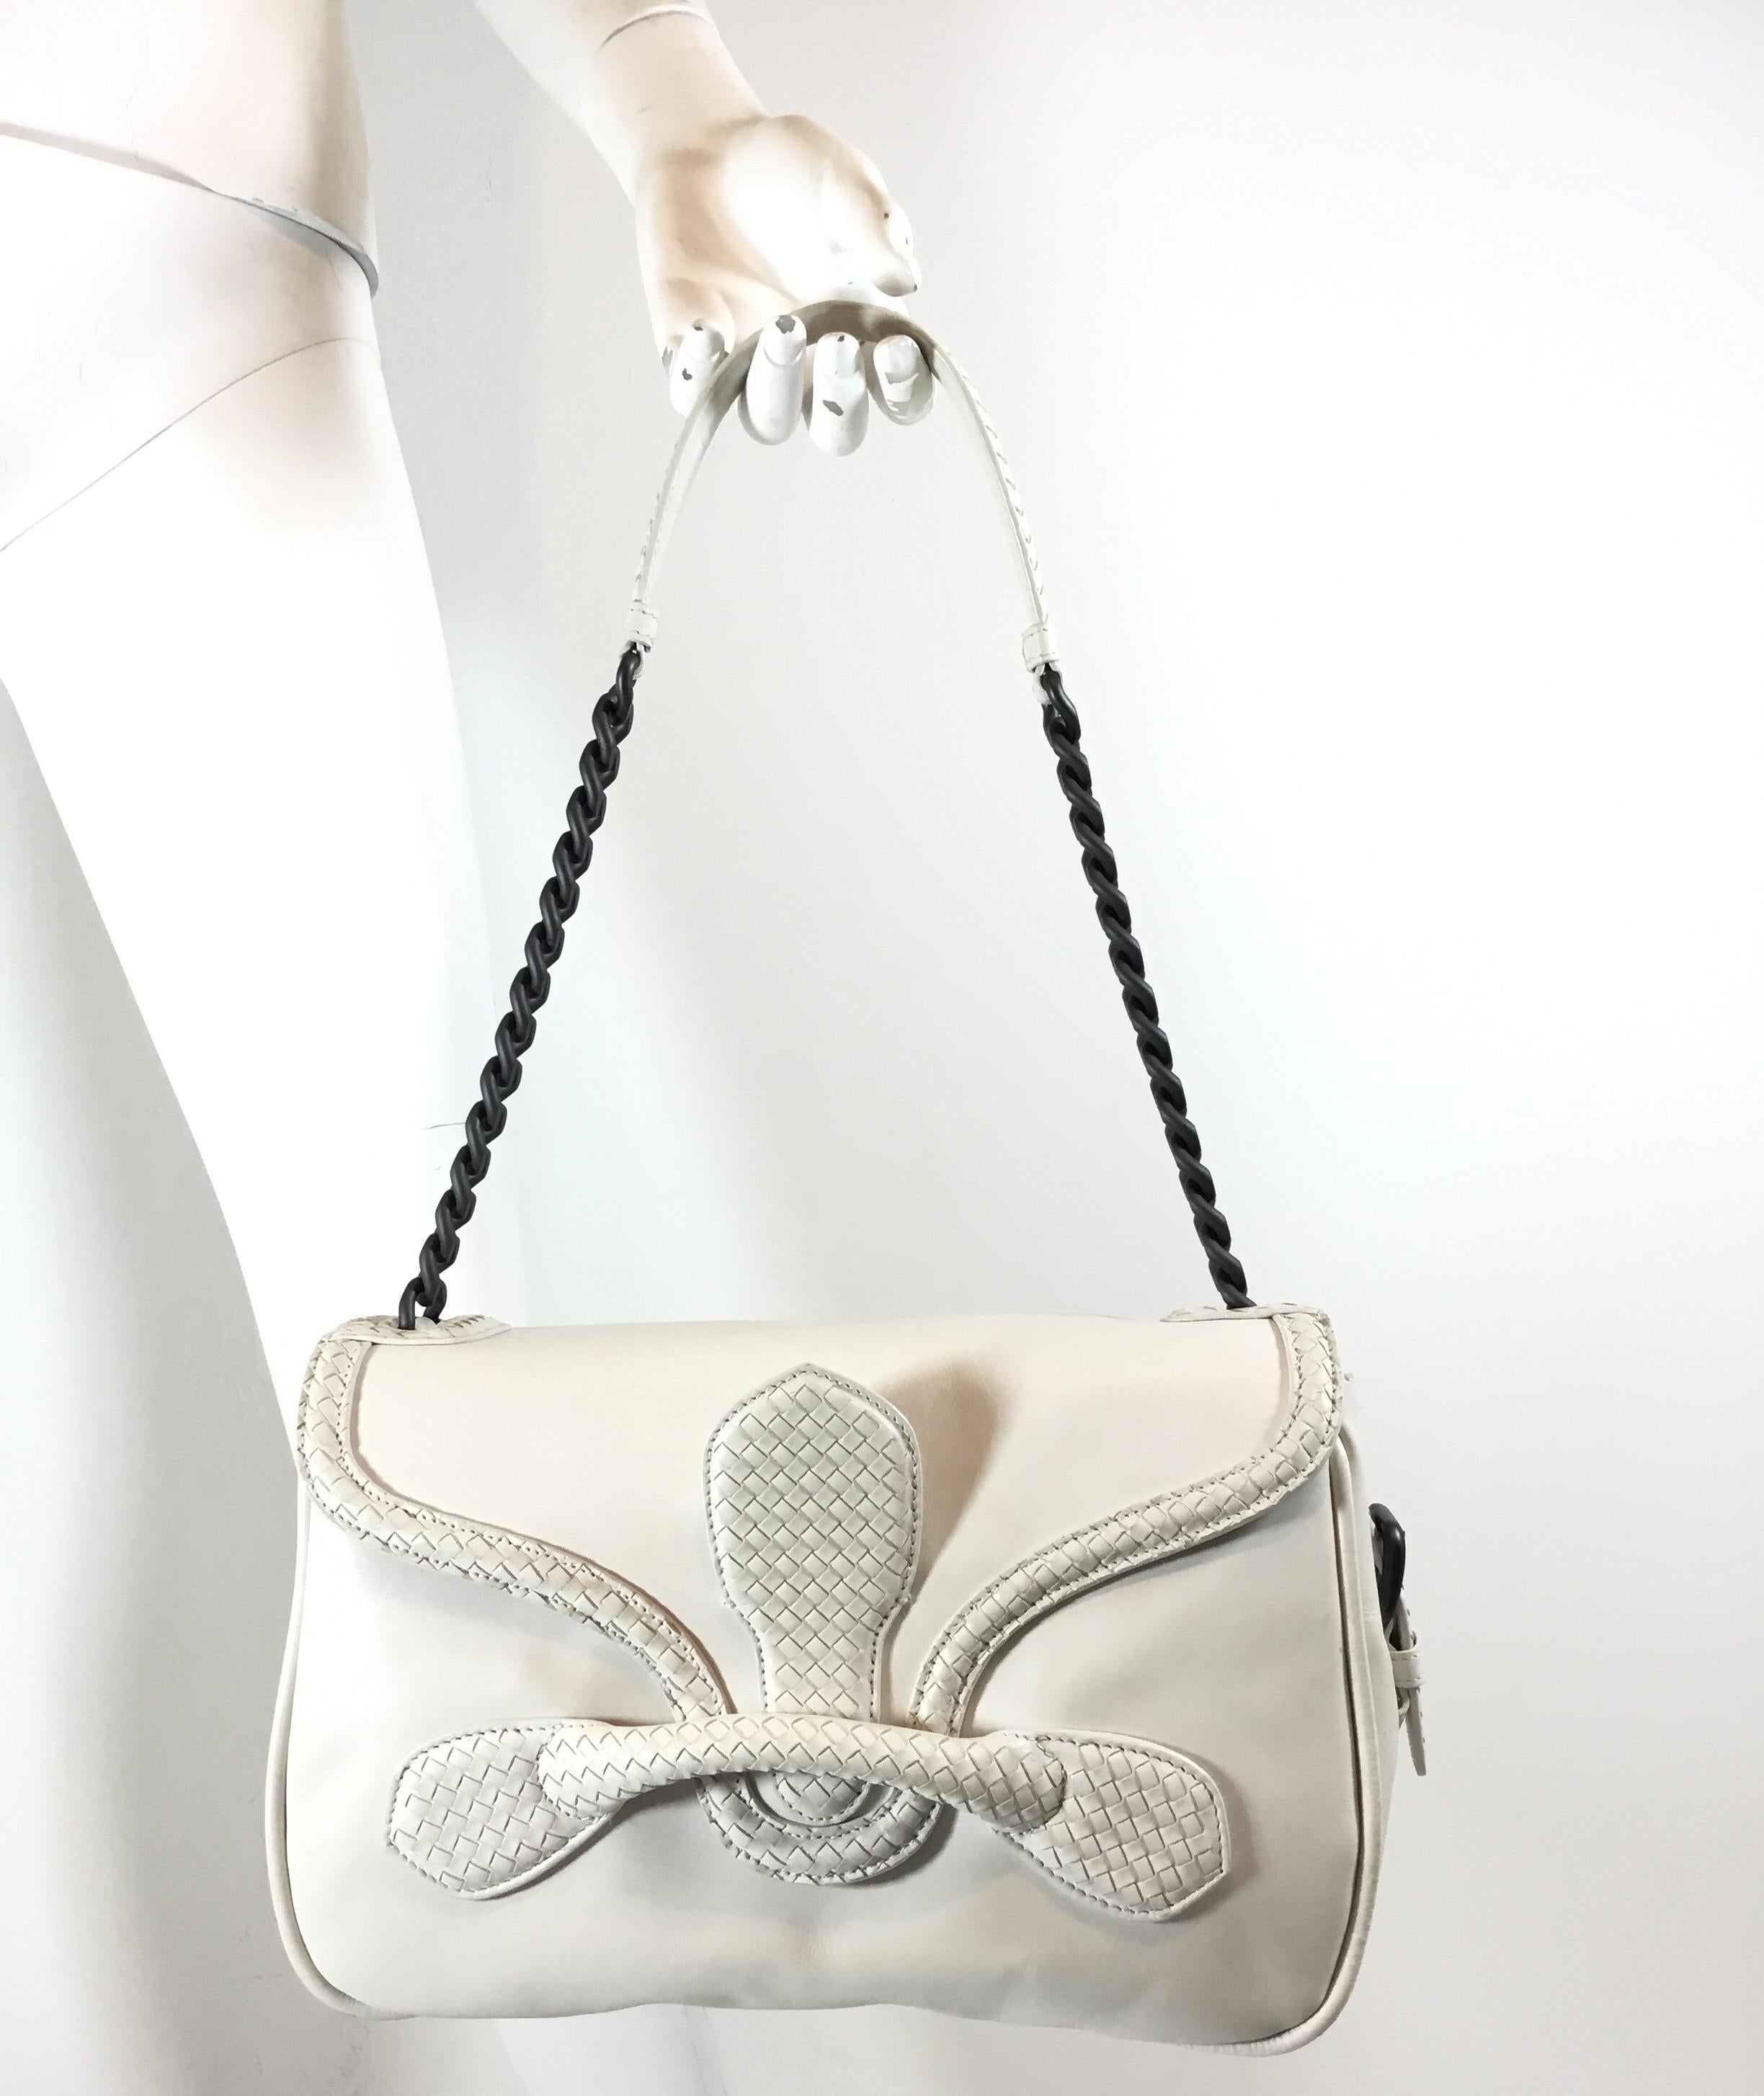  Bottega Veneta Off-white calf leather Rialto shoulder bag Crafted in Calf leather with woven Micro-Intreccio accents on the unusual closure and the stylish leather and brunito-finish handle. Comes with a coordinated mirror. Leather and suede lining